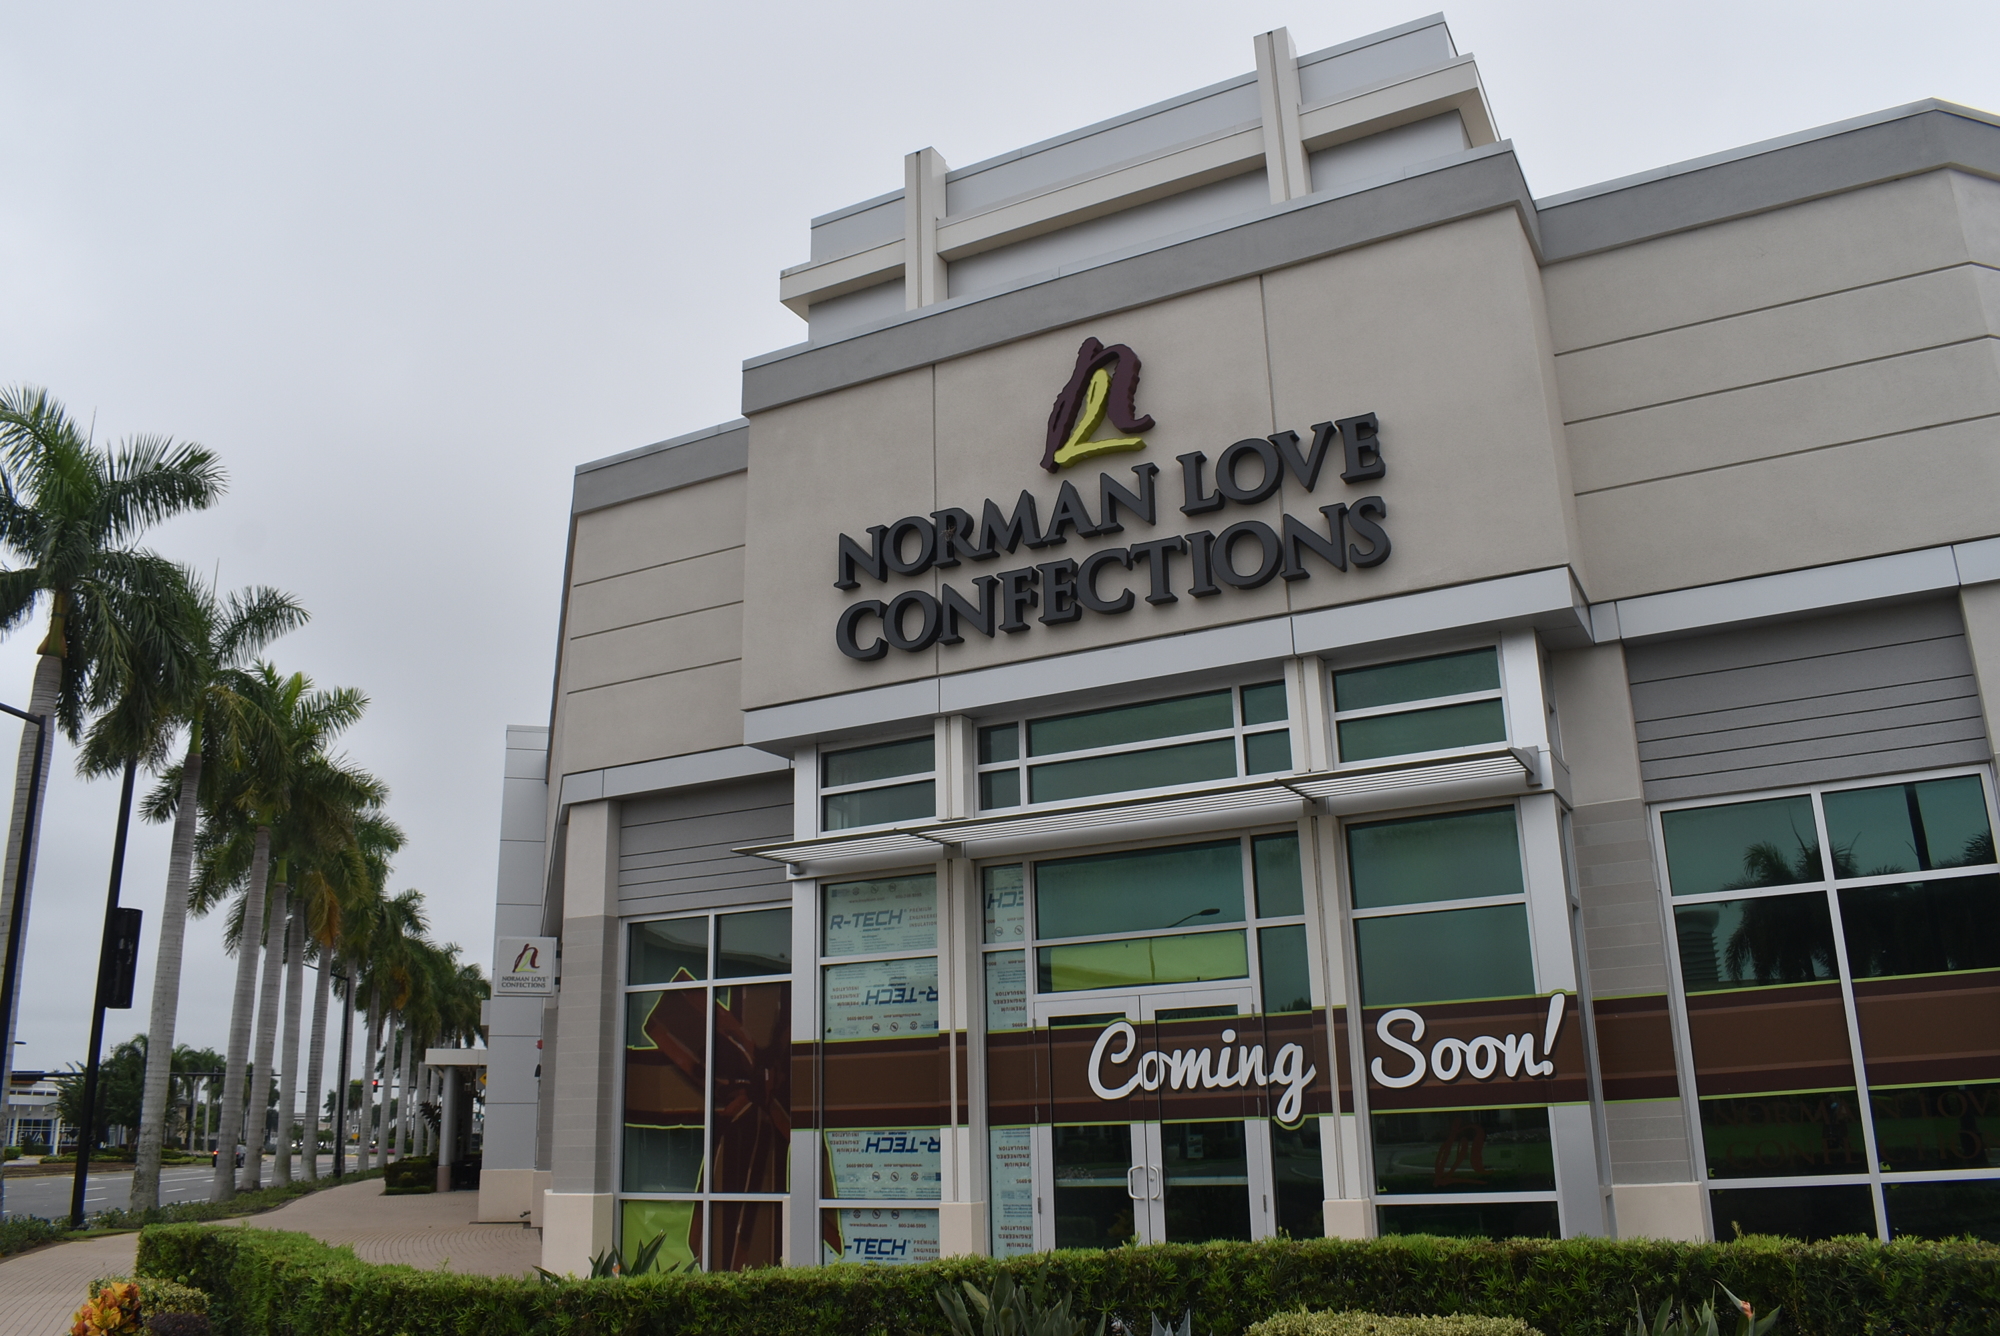 Norman Love Confections will be, in part, a dessert restaurant. It is scheduled for completion in late October or early November.